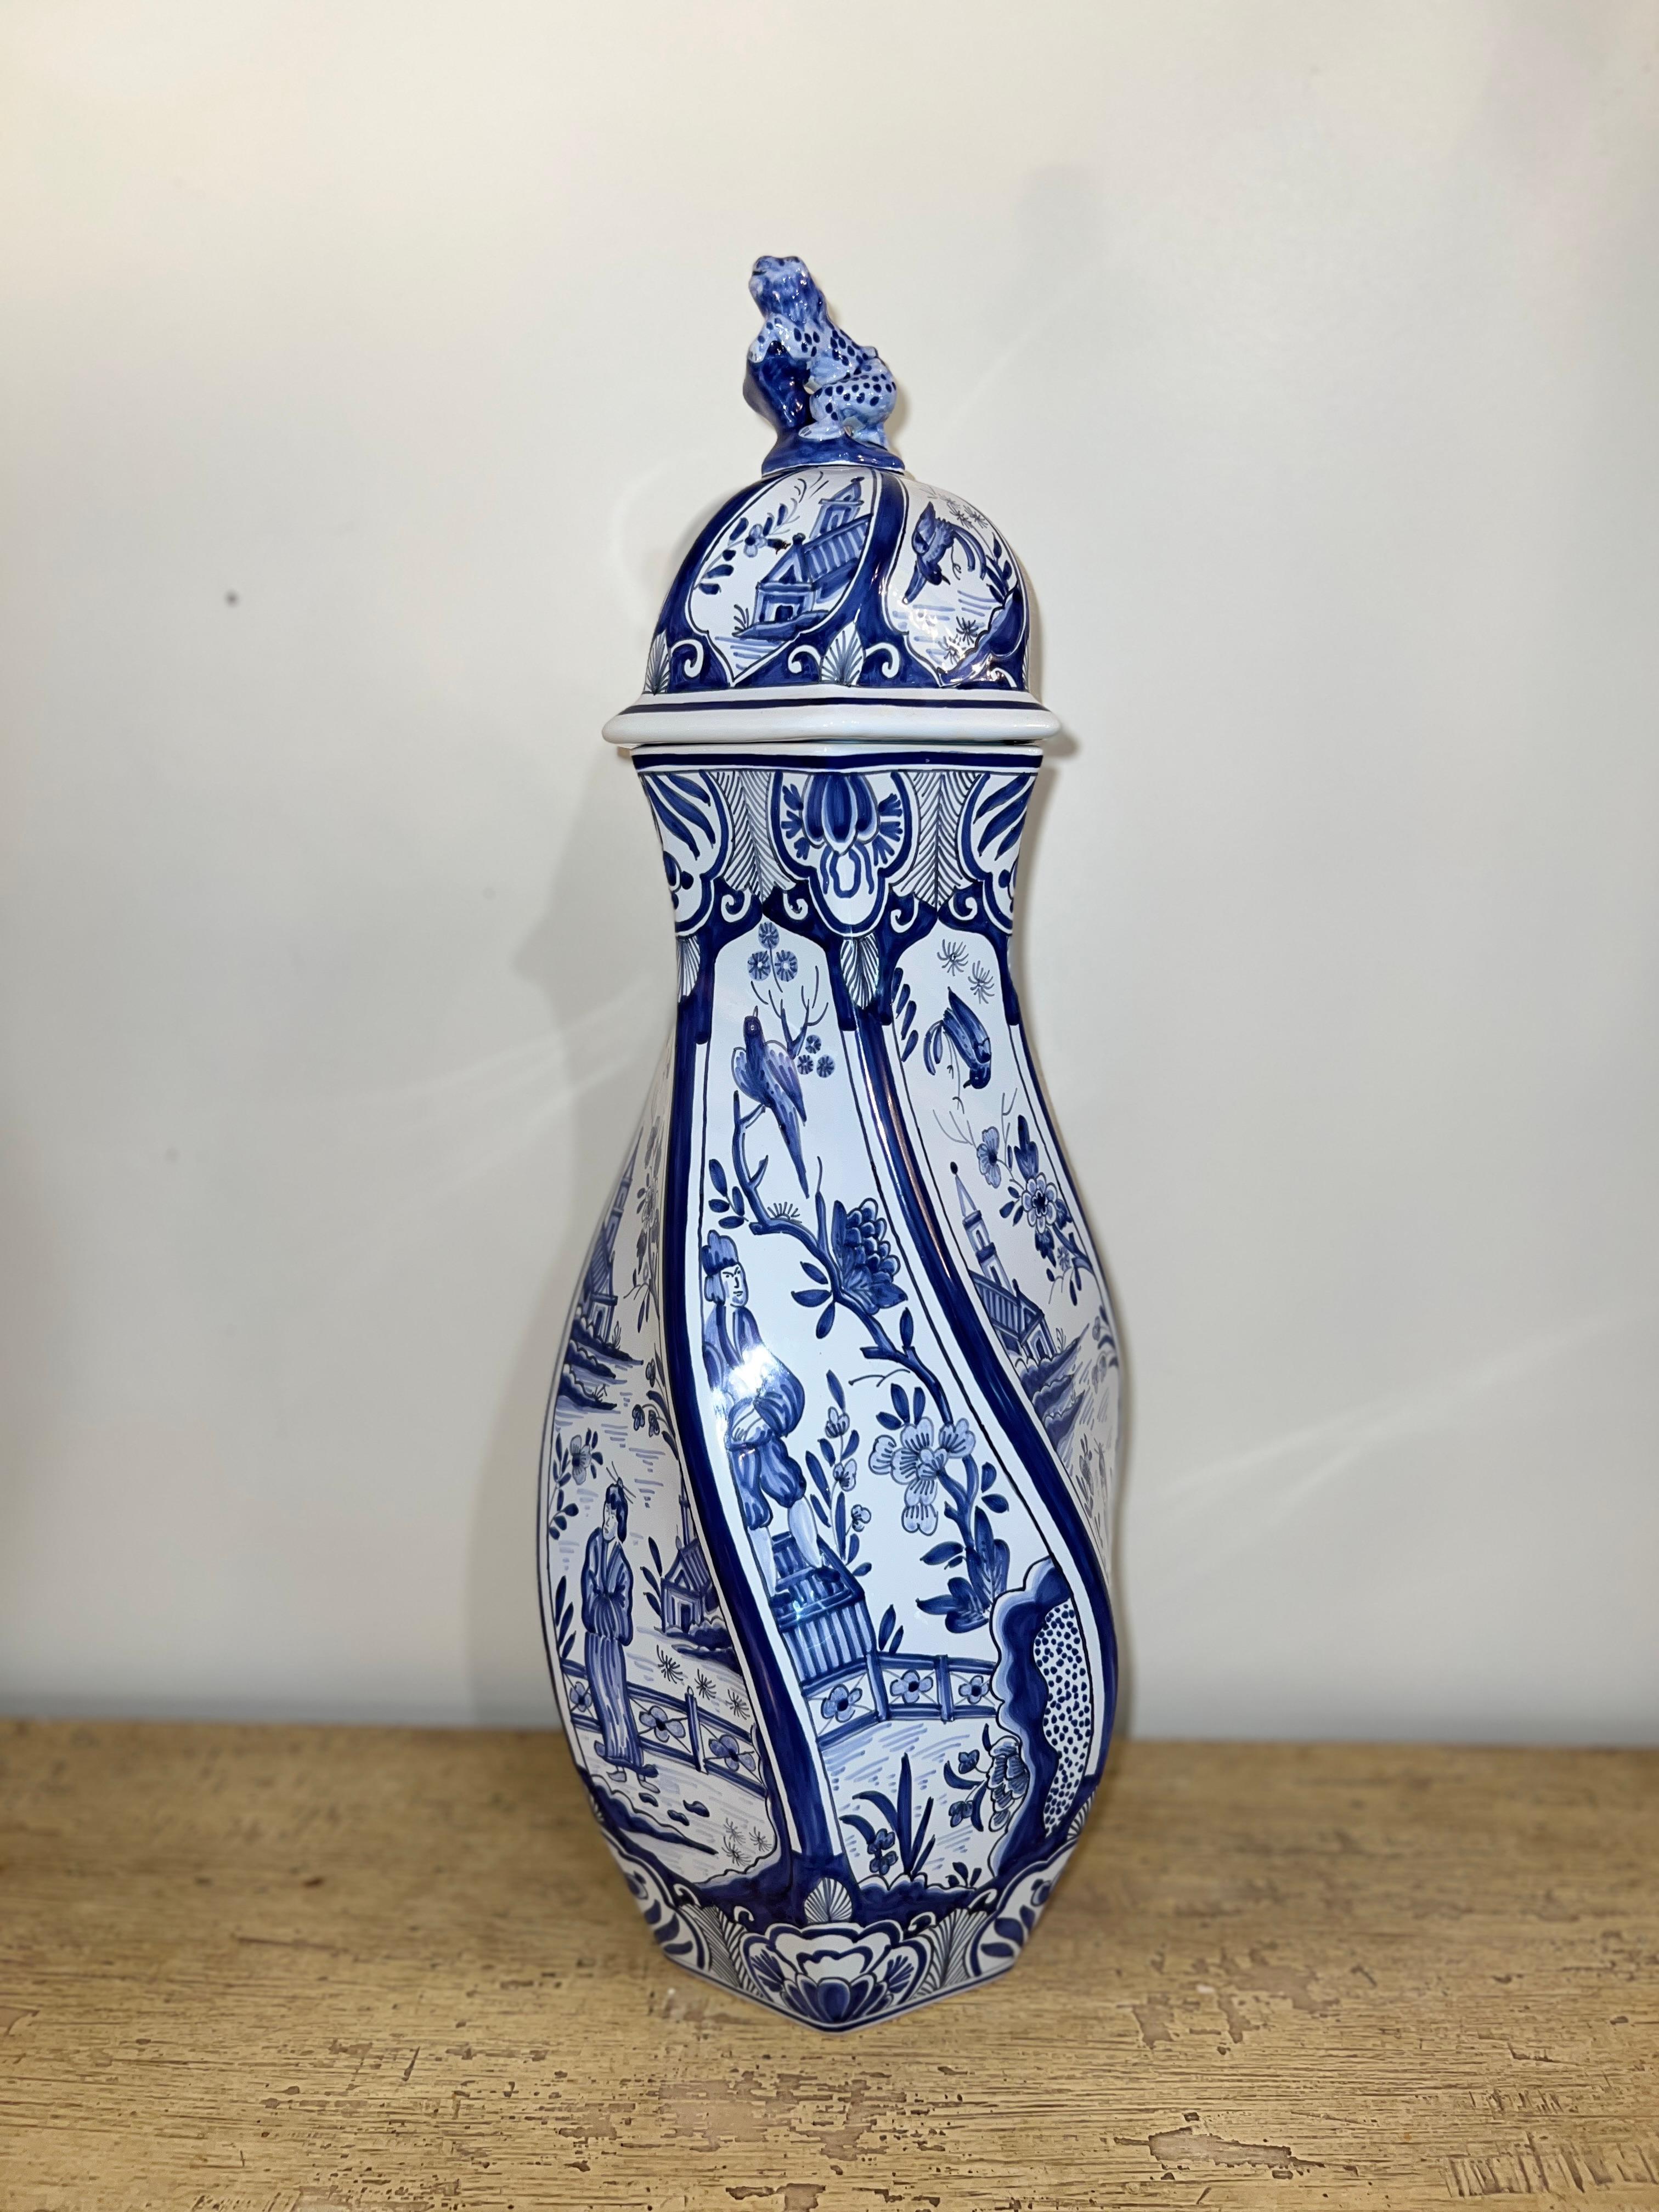 A hand-painted French blue and white lidded vase, signed for Tiffany & Co, featuring exquisite porcelain craftsmanship. 